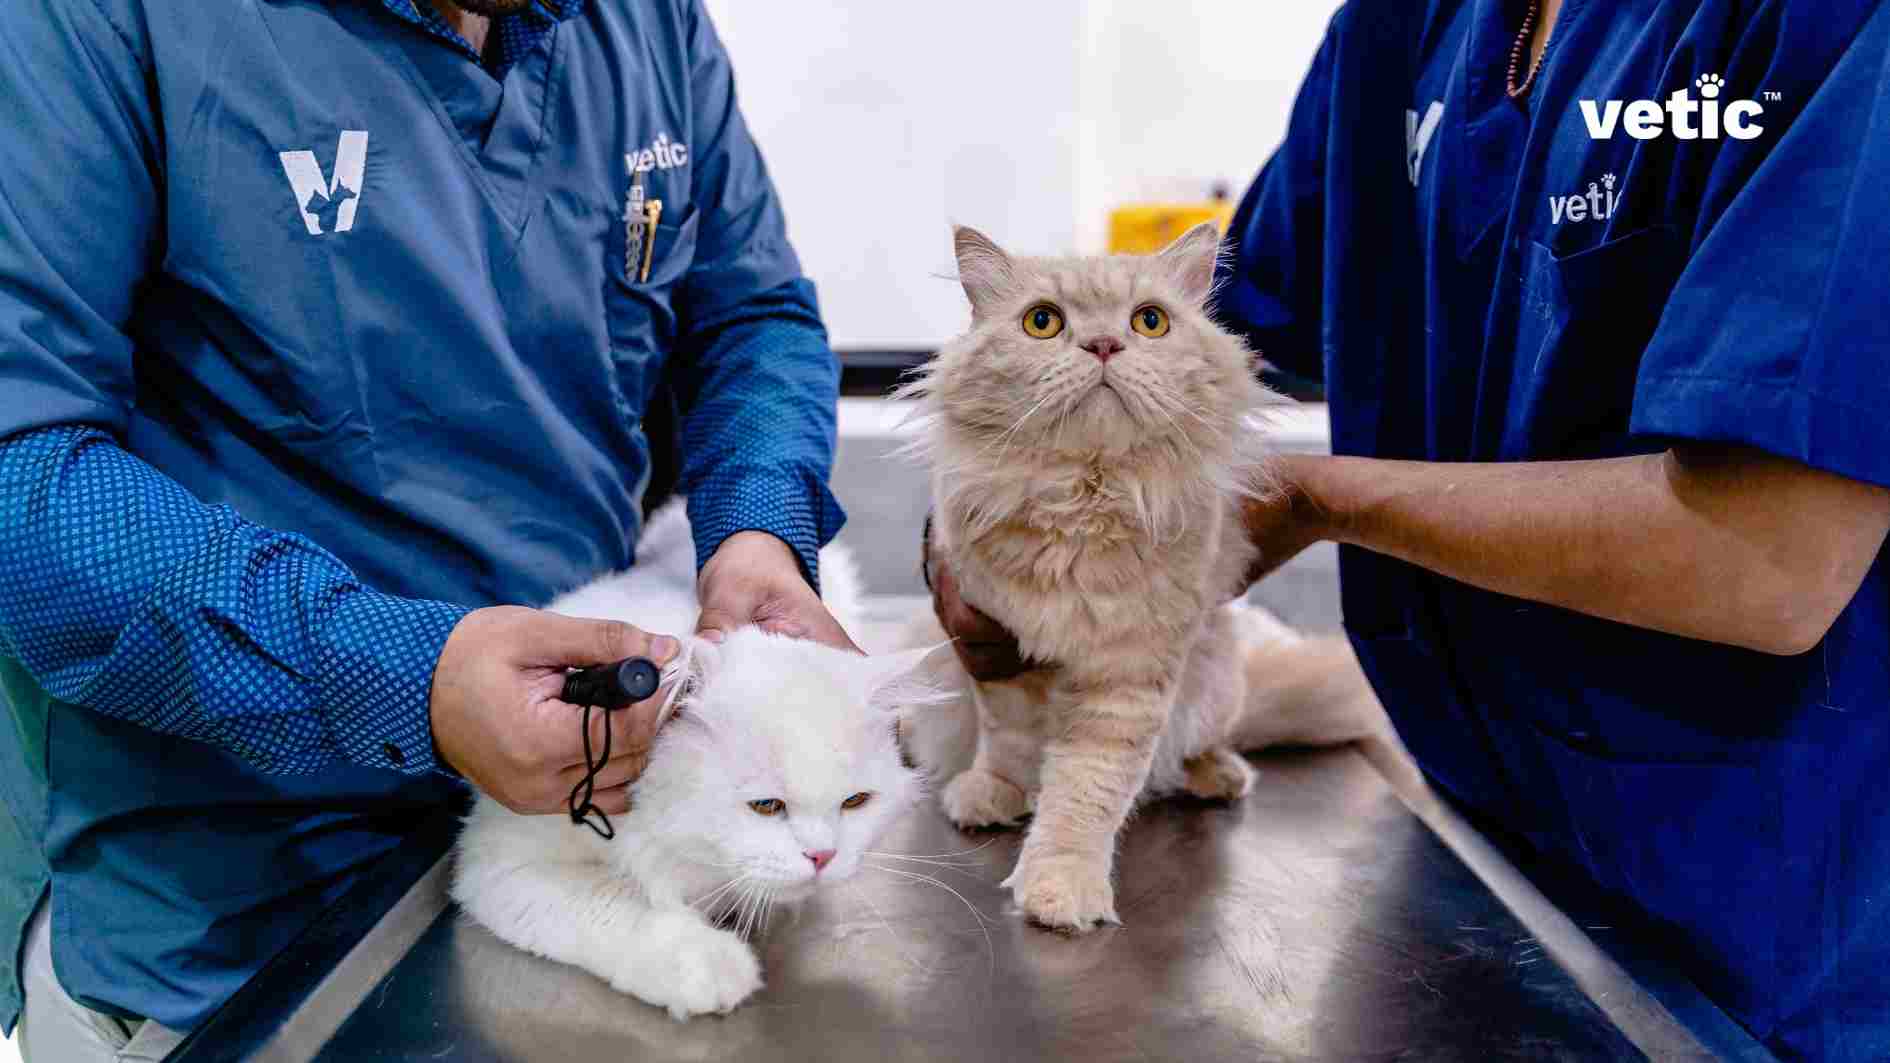 A photo of two professionals in blue uniforms attending to two cats on a metallic table at a veterinary clinic. One cat is white and the other is beige, and they appear calm. The professional with the “vetic” logo is holding an instrument near the ear of the white cat, while the other professional gently holds the beige cat. The image shows a scene of pet care, which can be related to health and wellness topics such as deworming. Two professionals in blue uniforms caring for two cats on a table at a “vetic” clinic. At all Vetic Pet Clinics, including Vetic Pet Clinic Thane, cats are seen by veterinarians after nail clipping and grooming. A white cat and a beige cat being examined by two professionals with a “vetic” logo on a metallic table An instrument near the ear of a white cat and a beige cat beside it on a table with two professionals in the blue vetic scrubs and uniform.